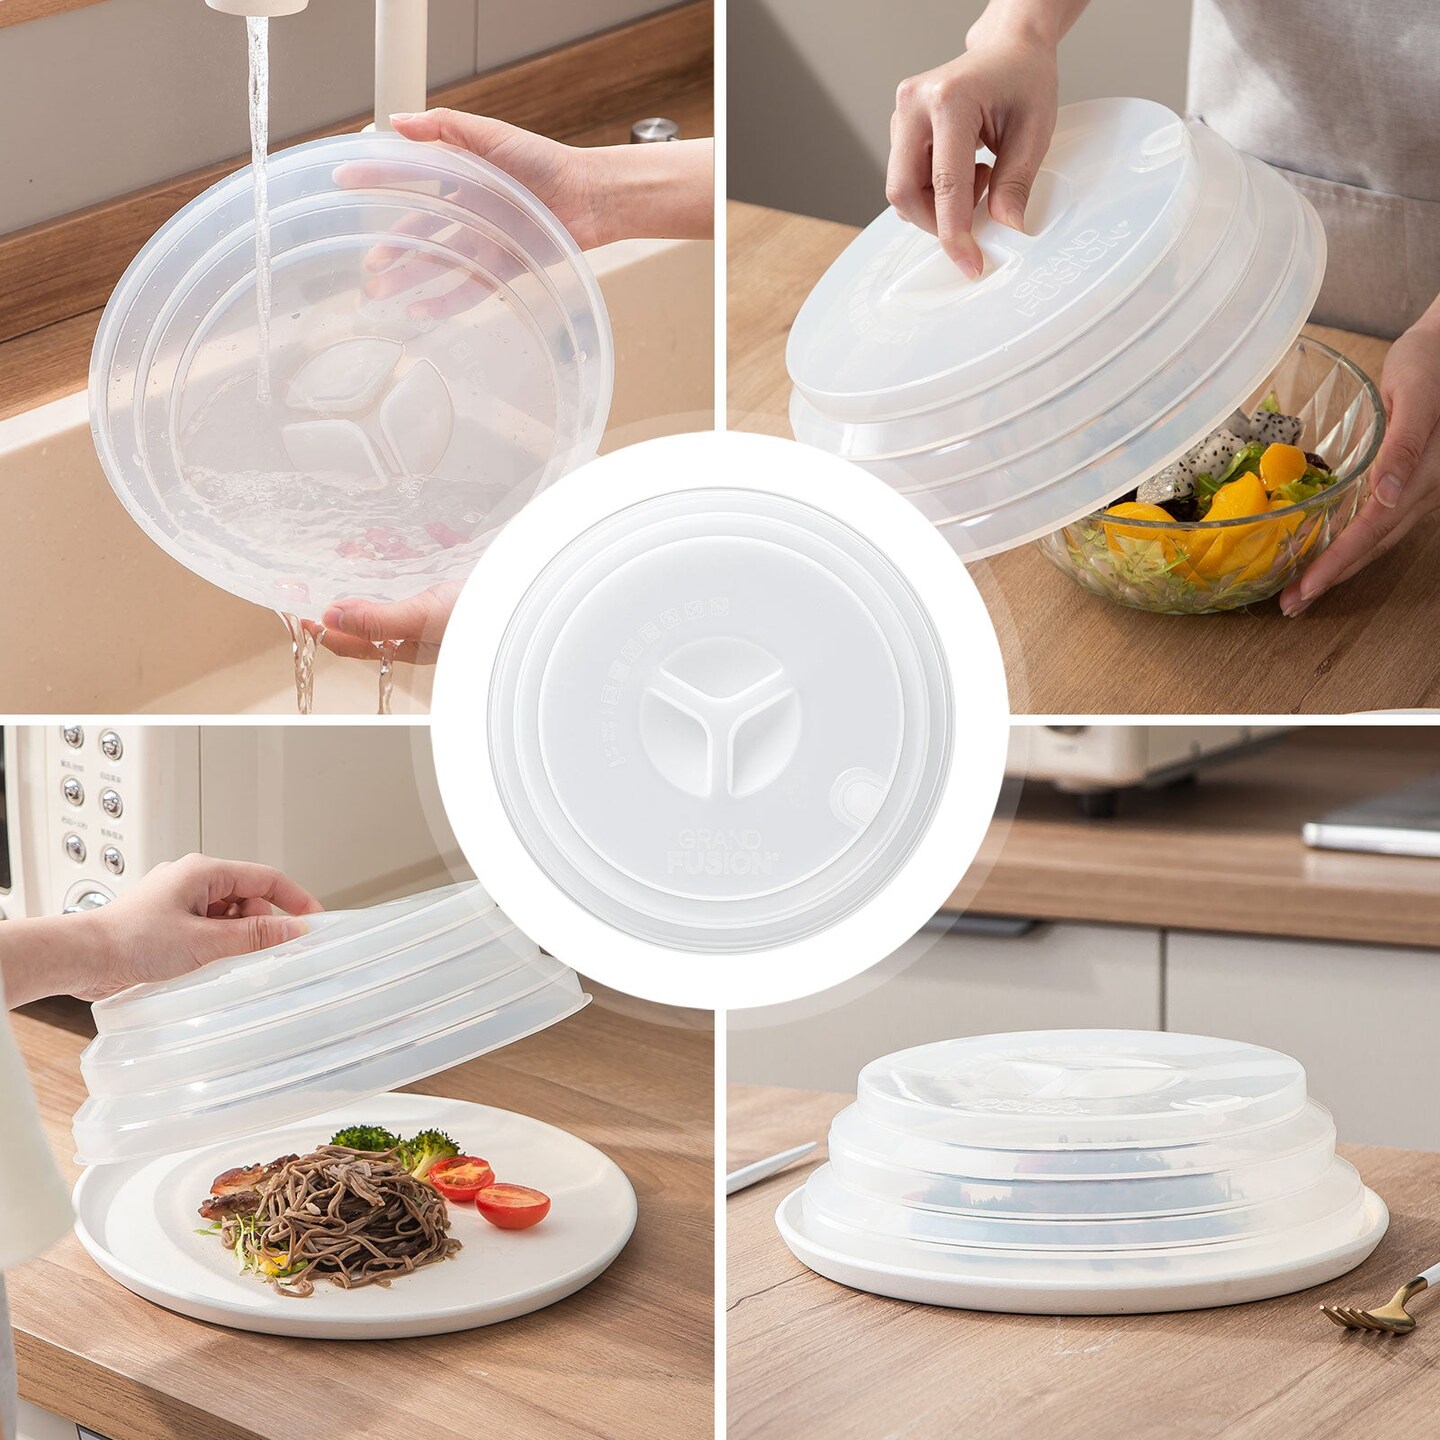 Microwave Food Covers - Silicone Vented Reusable Covers, From Grand Fusion